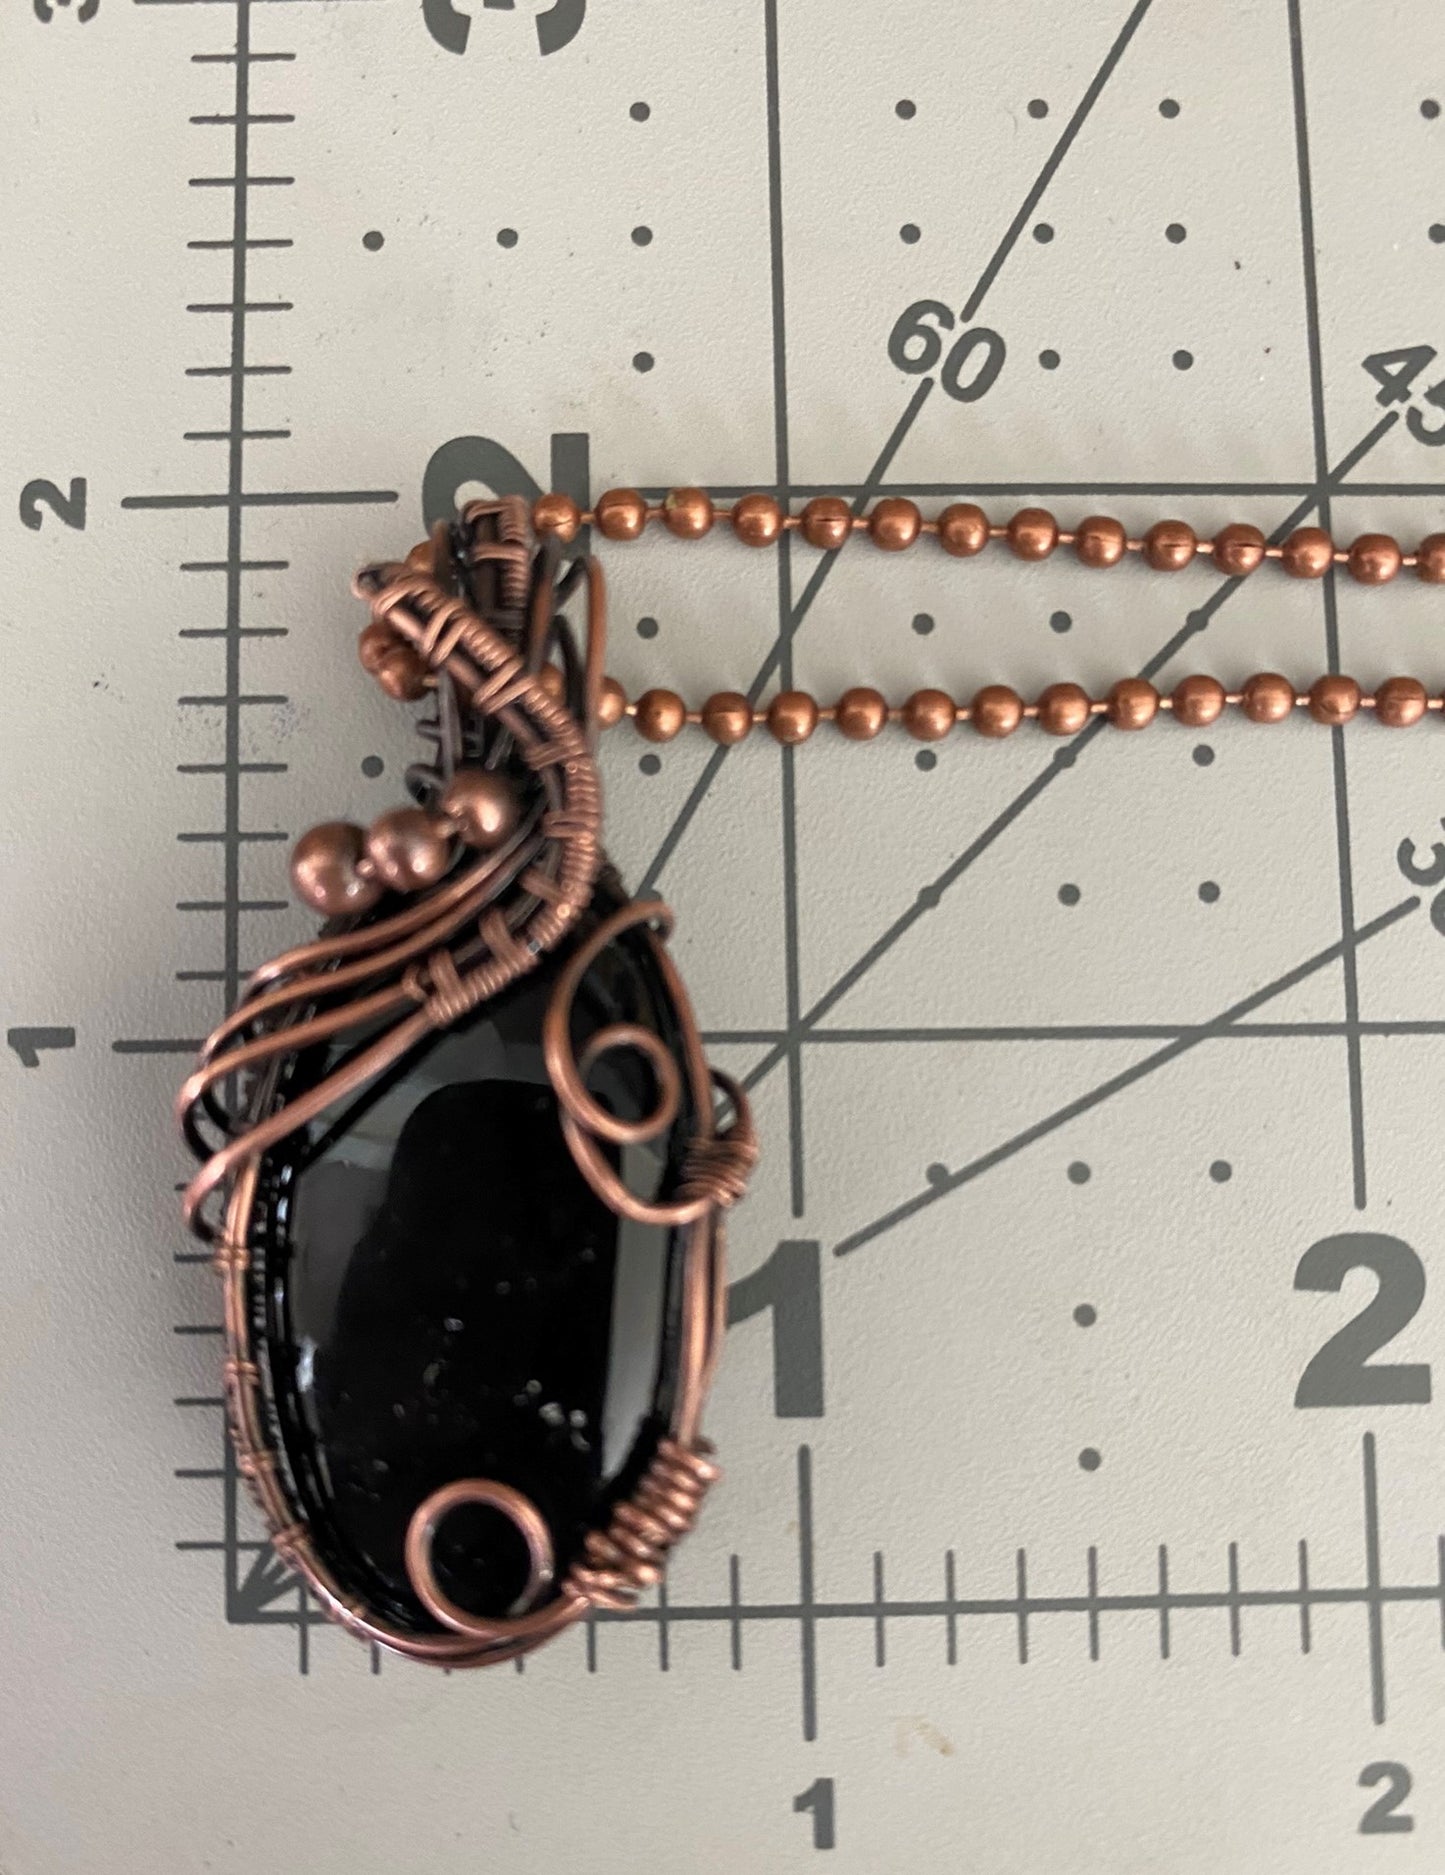 Black Onyx Oval Wire Wrapped Pendant